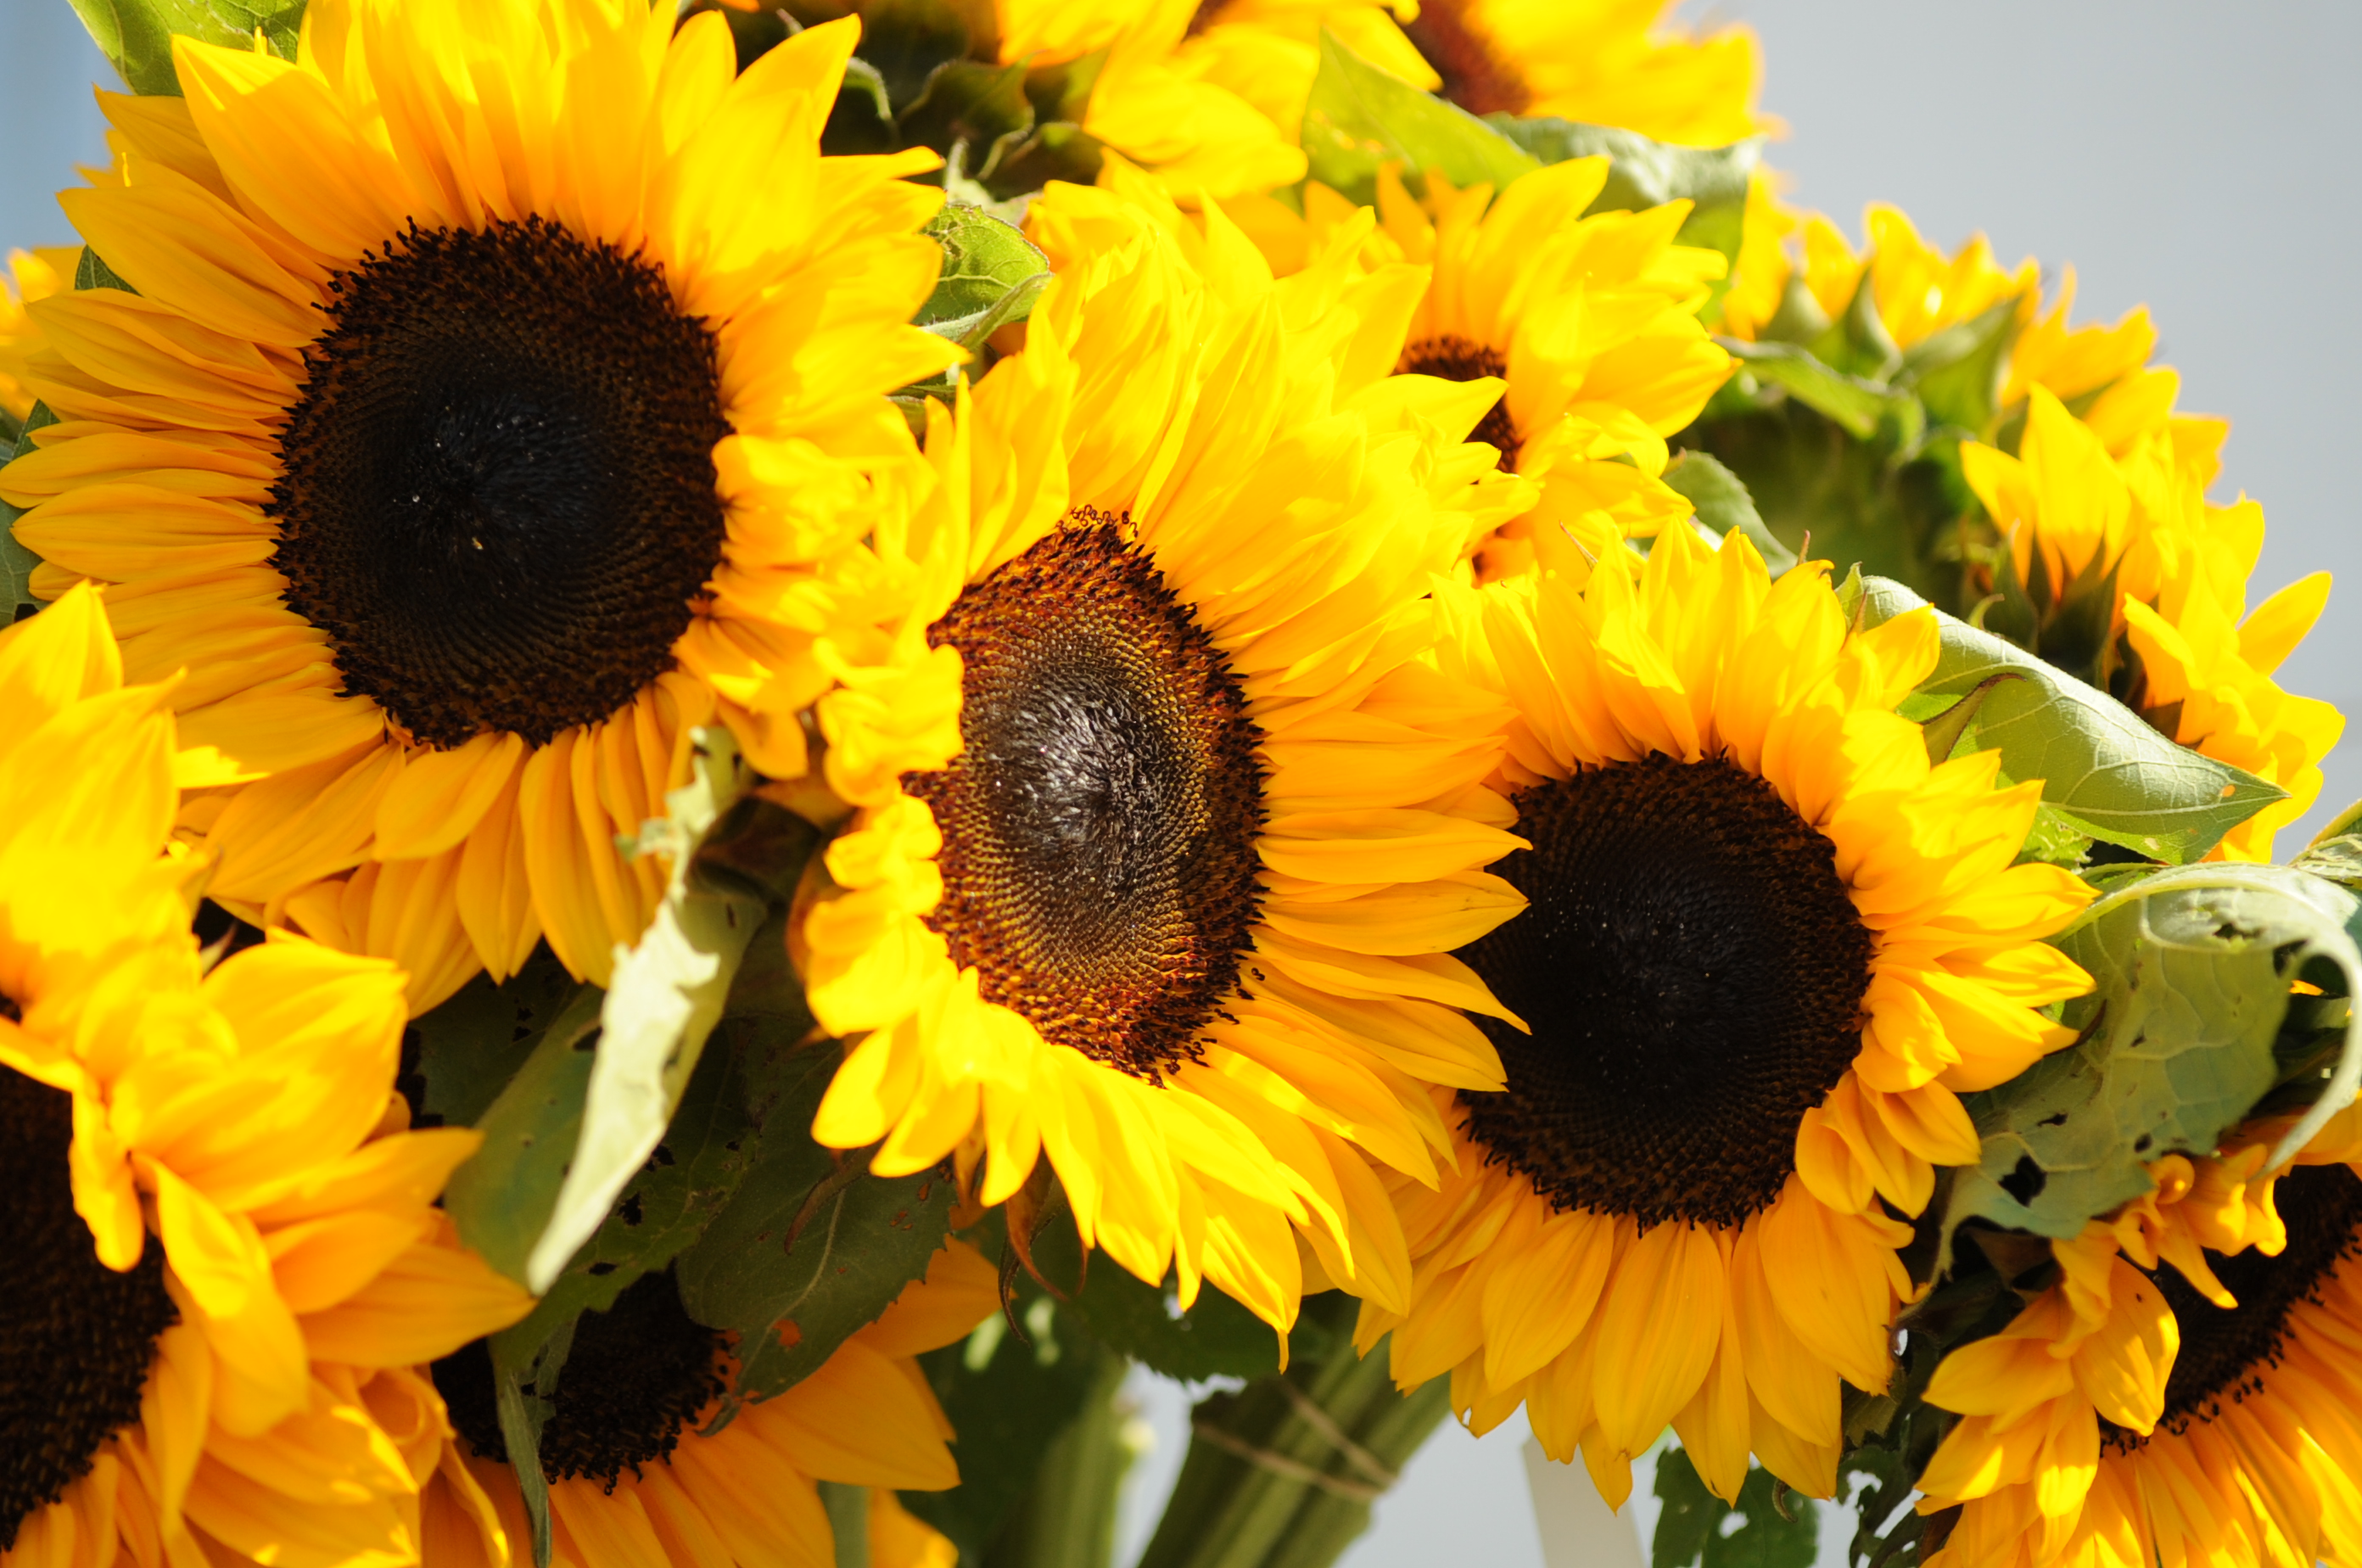 Our own sunflowers! |